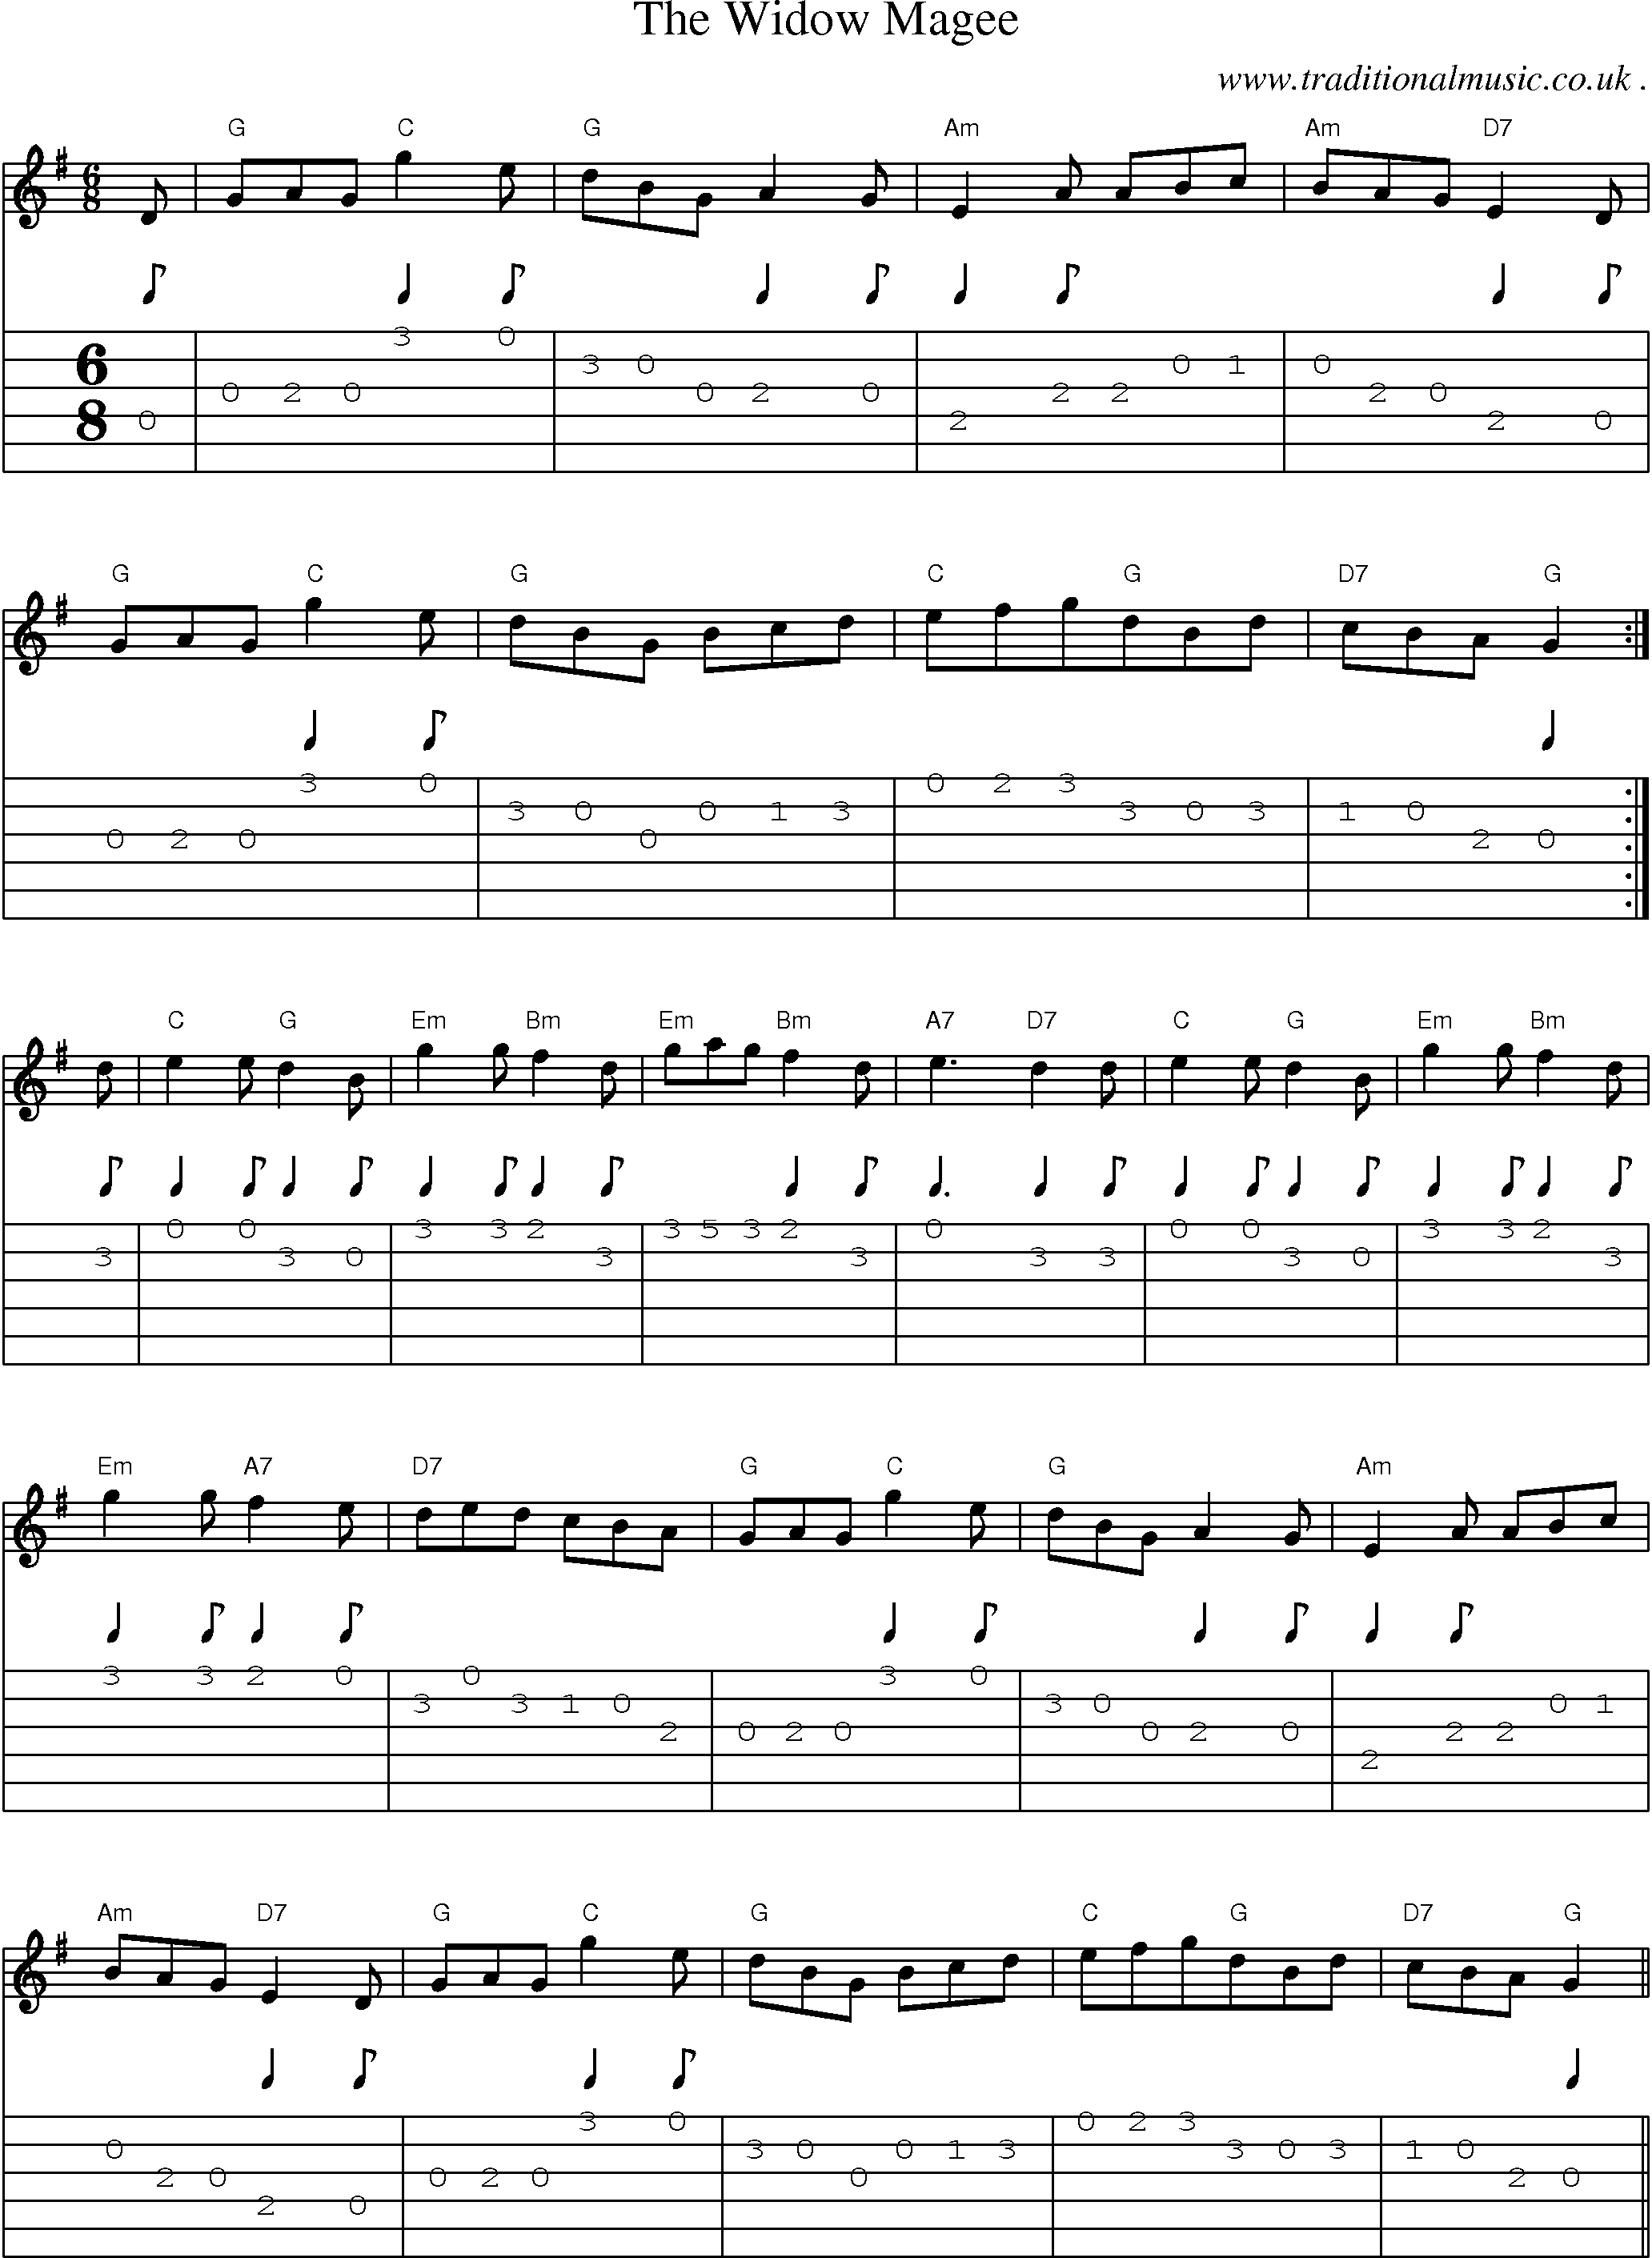 Sheet-Music and Guitar Tabs for The Widow Magee